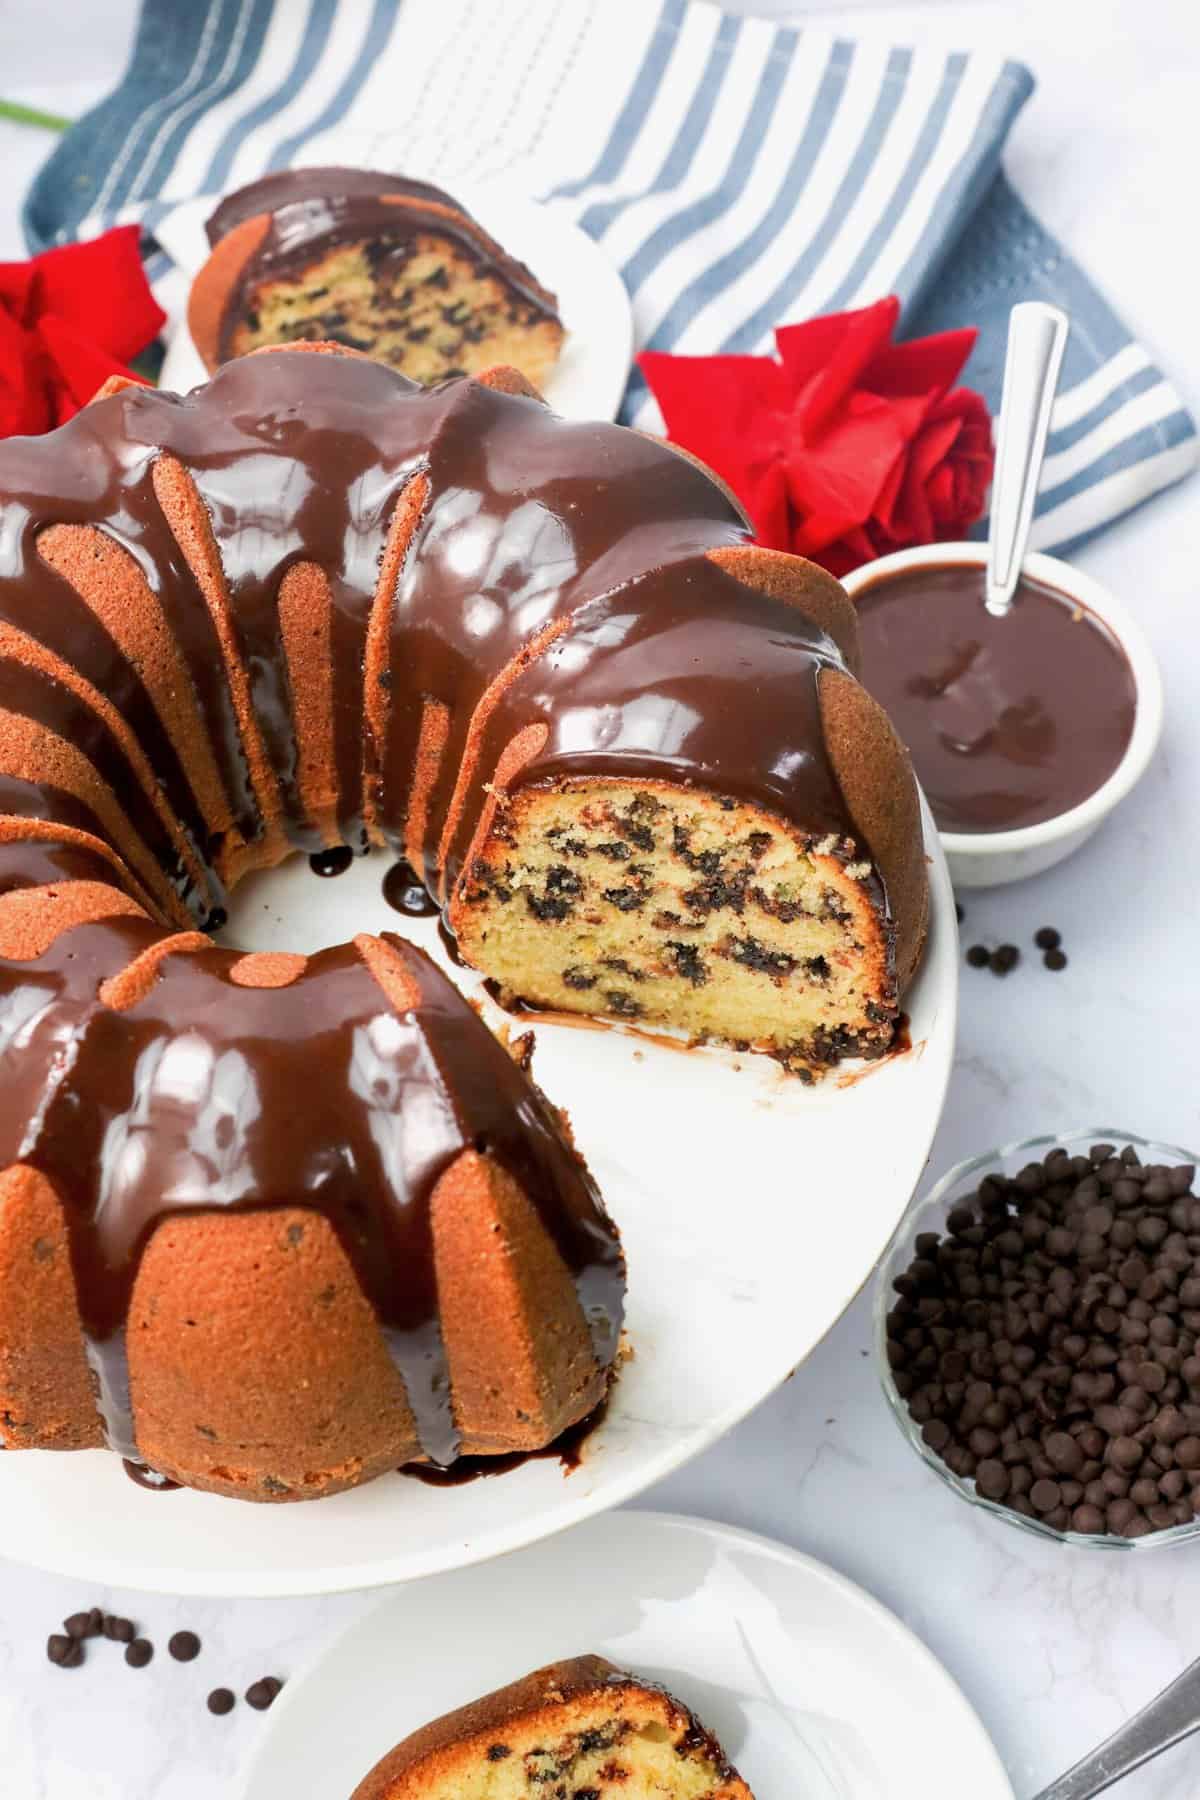 Serving up insanely delicious Chocolate Chip Bundt Cake